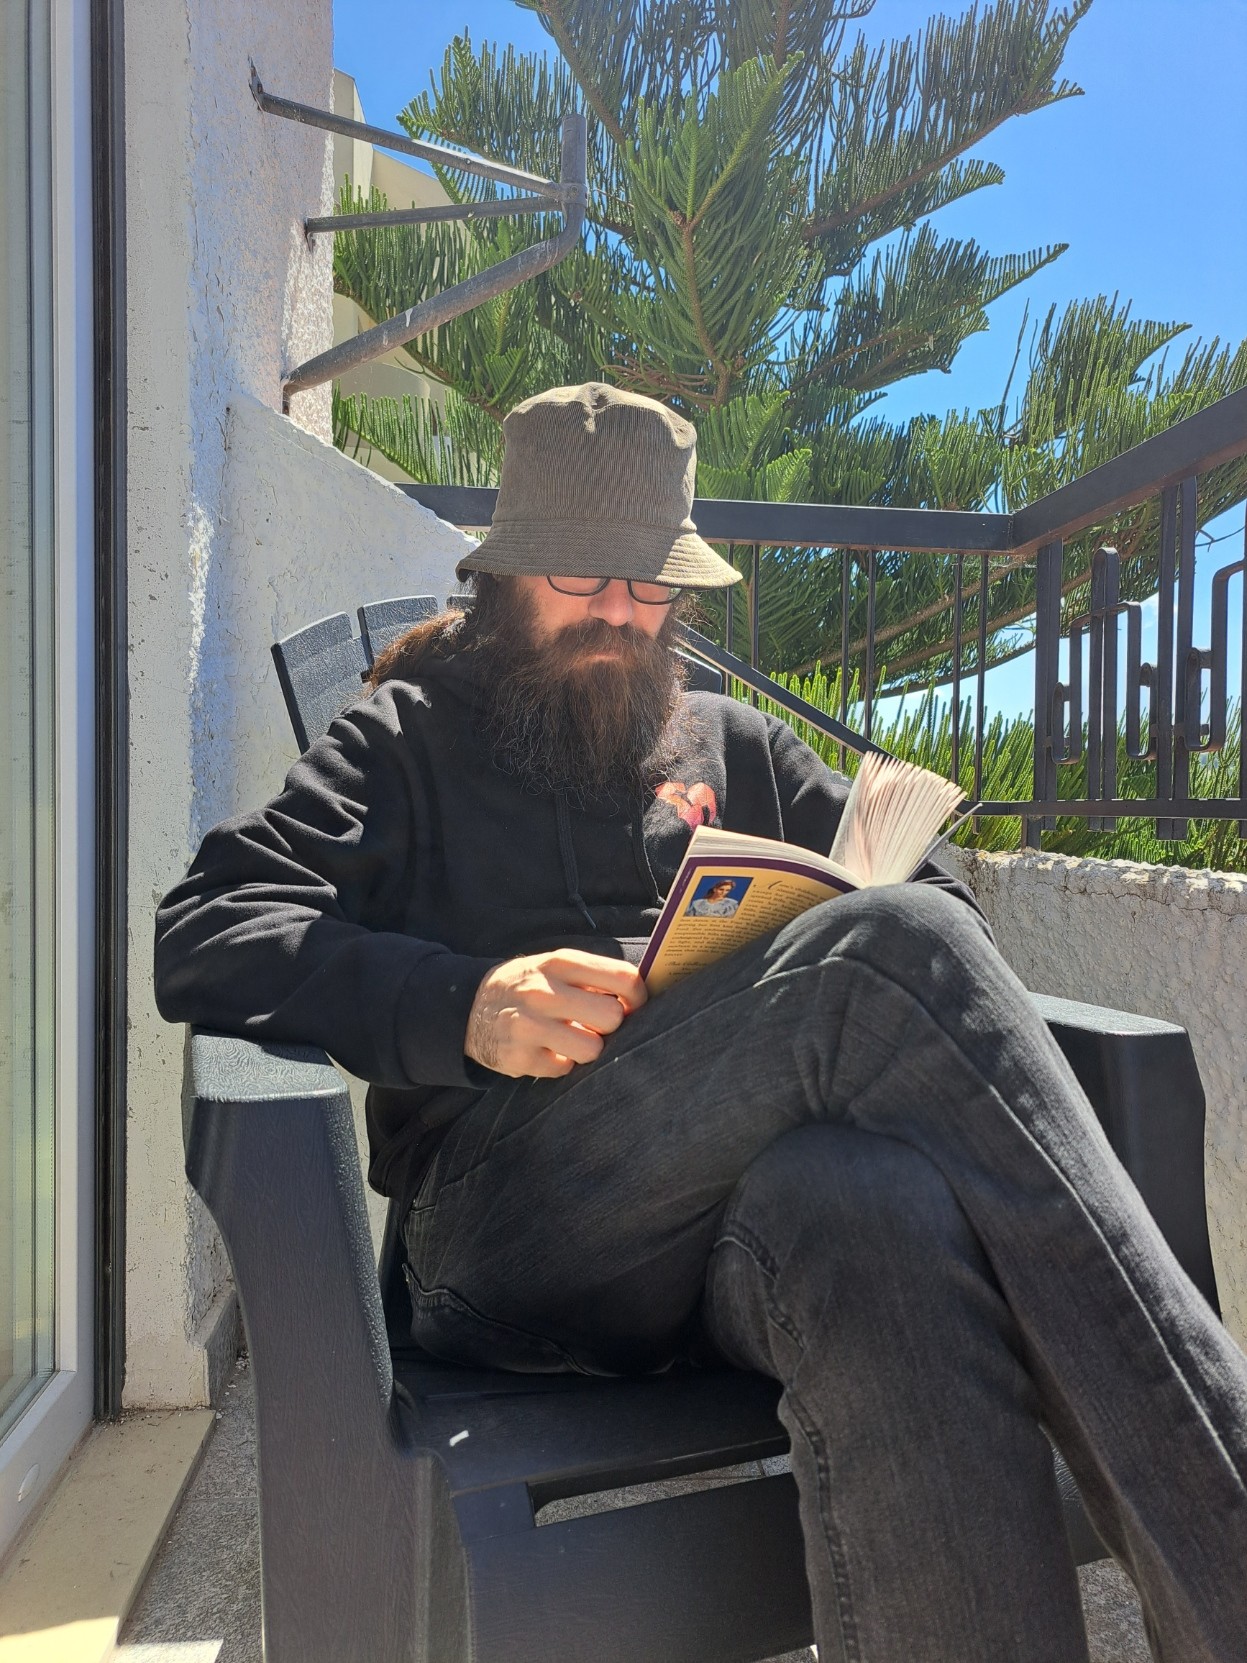 A guy (me) seated on a chair, reading a book (Rilla of Ingleside).